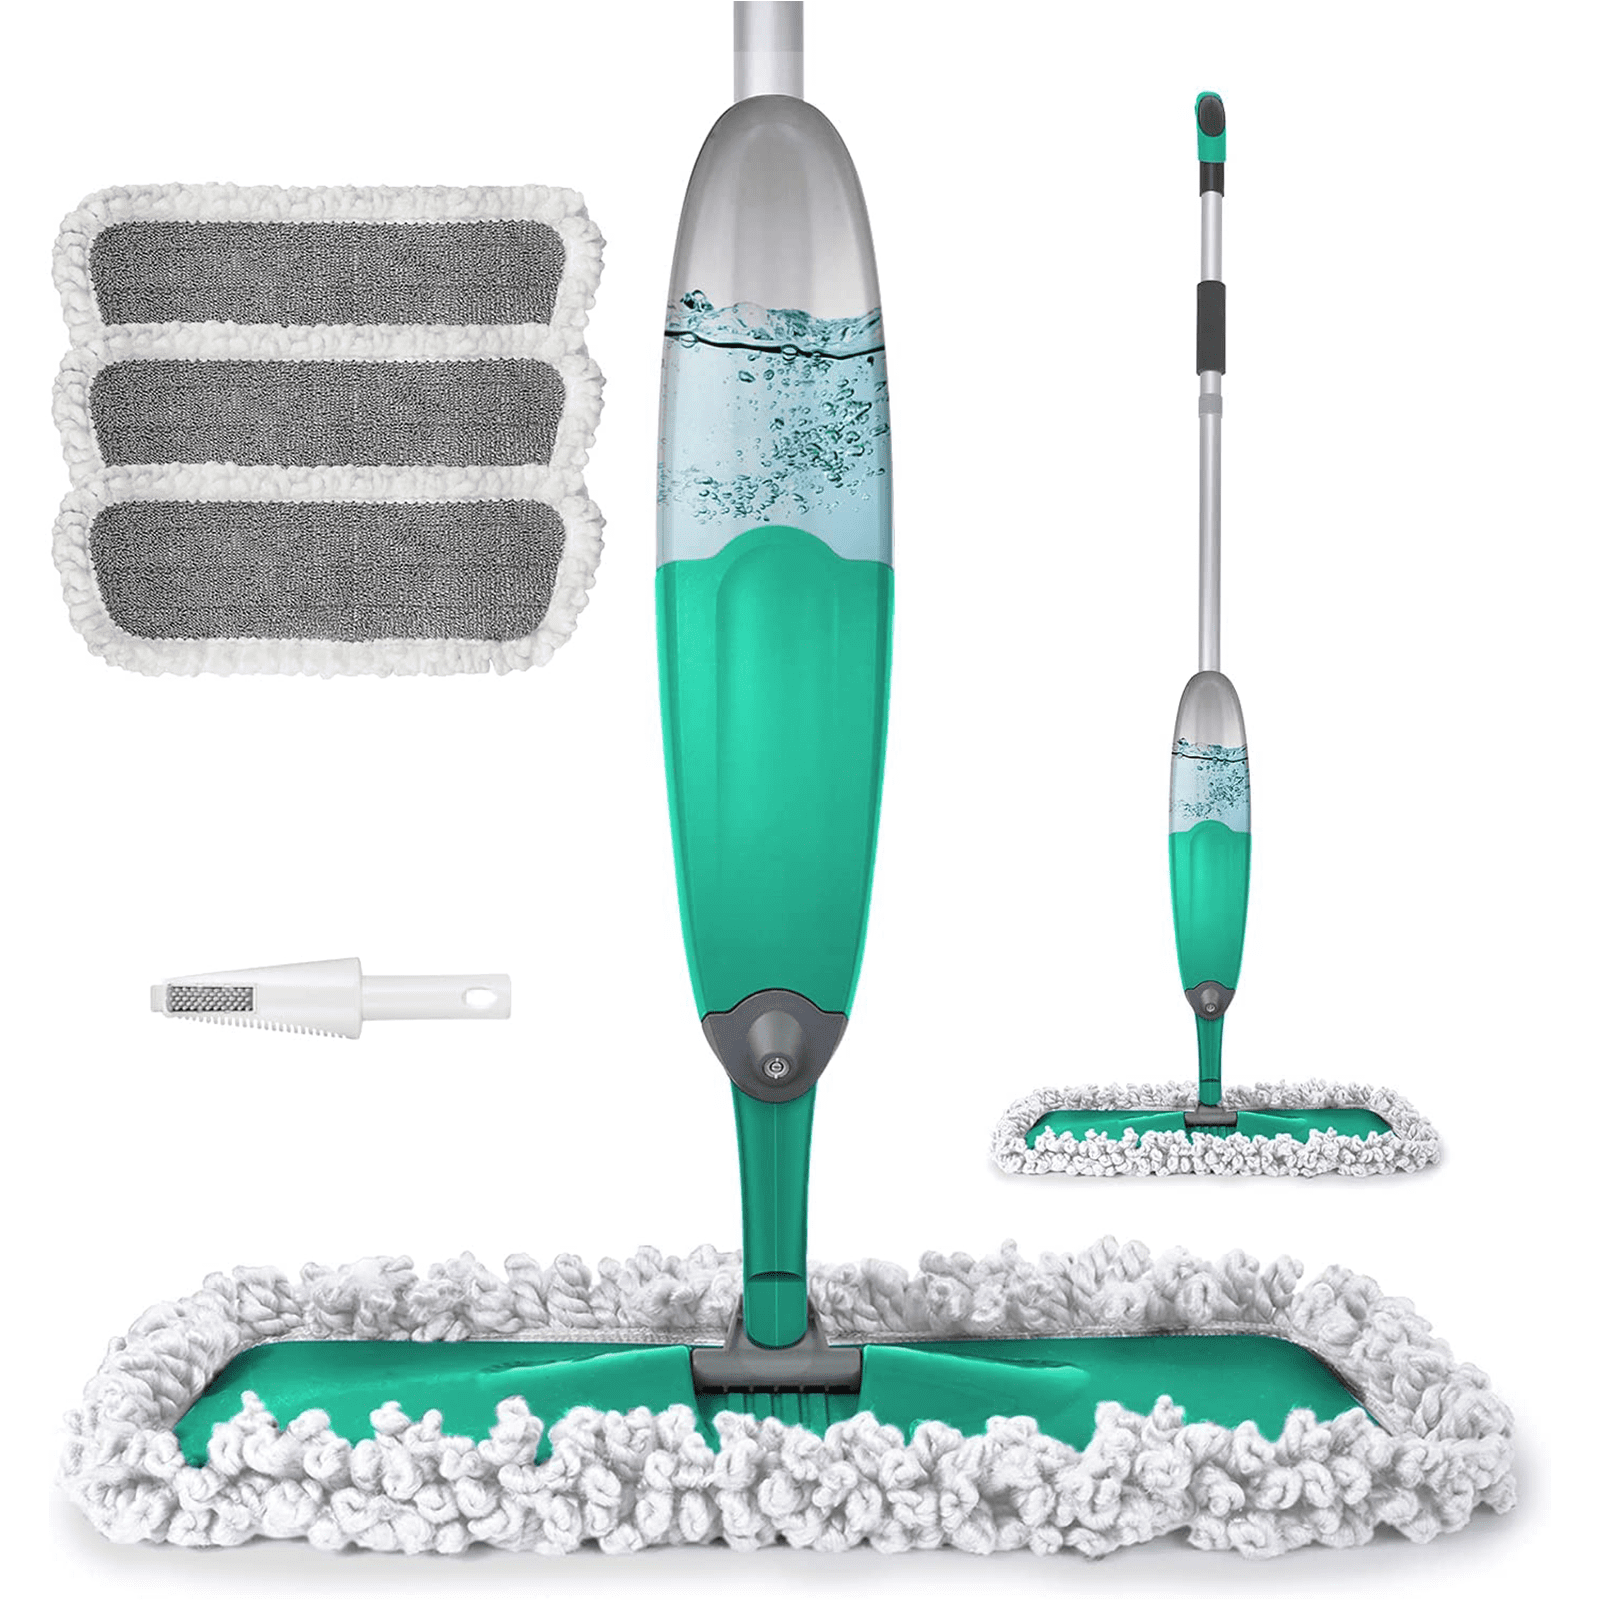 Microfiber Spray Mop for Floor Cleaning Wet Dry, 360 Degree Spin Dust Home Kitchen Hardwood Floor Flat Mops with 360ml Refillable Bottle Include 4